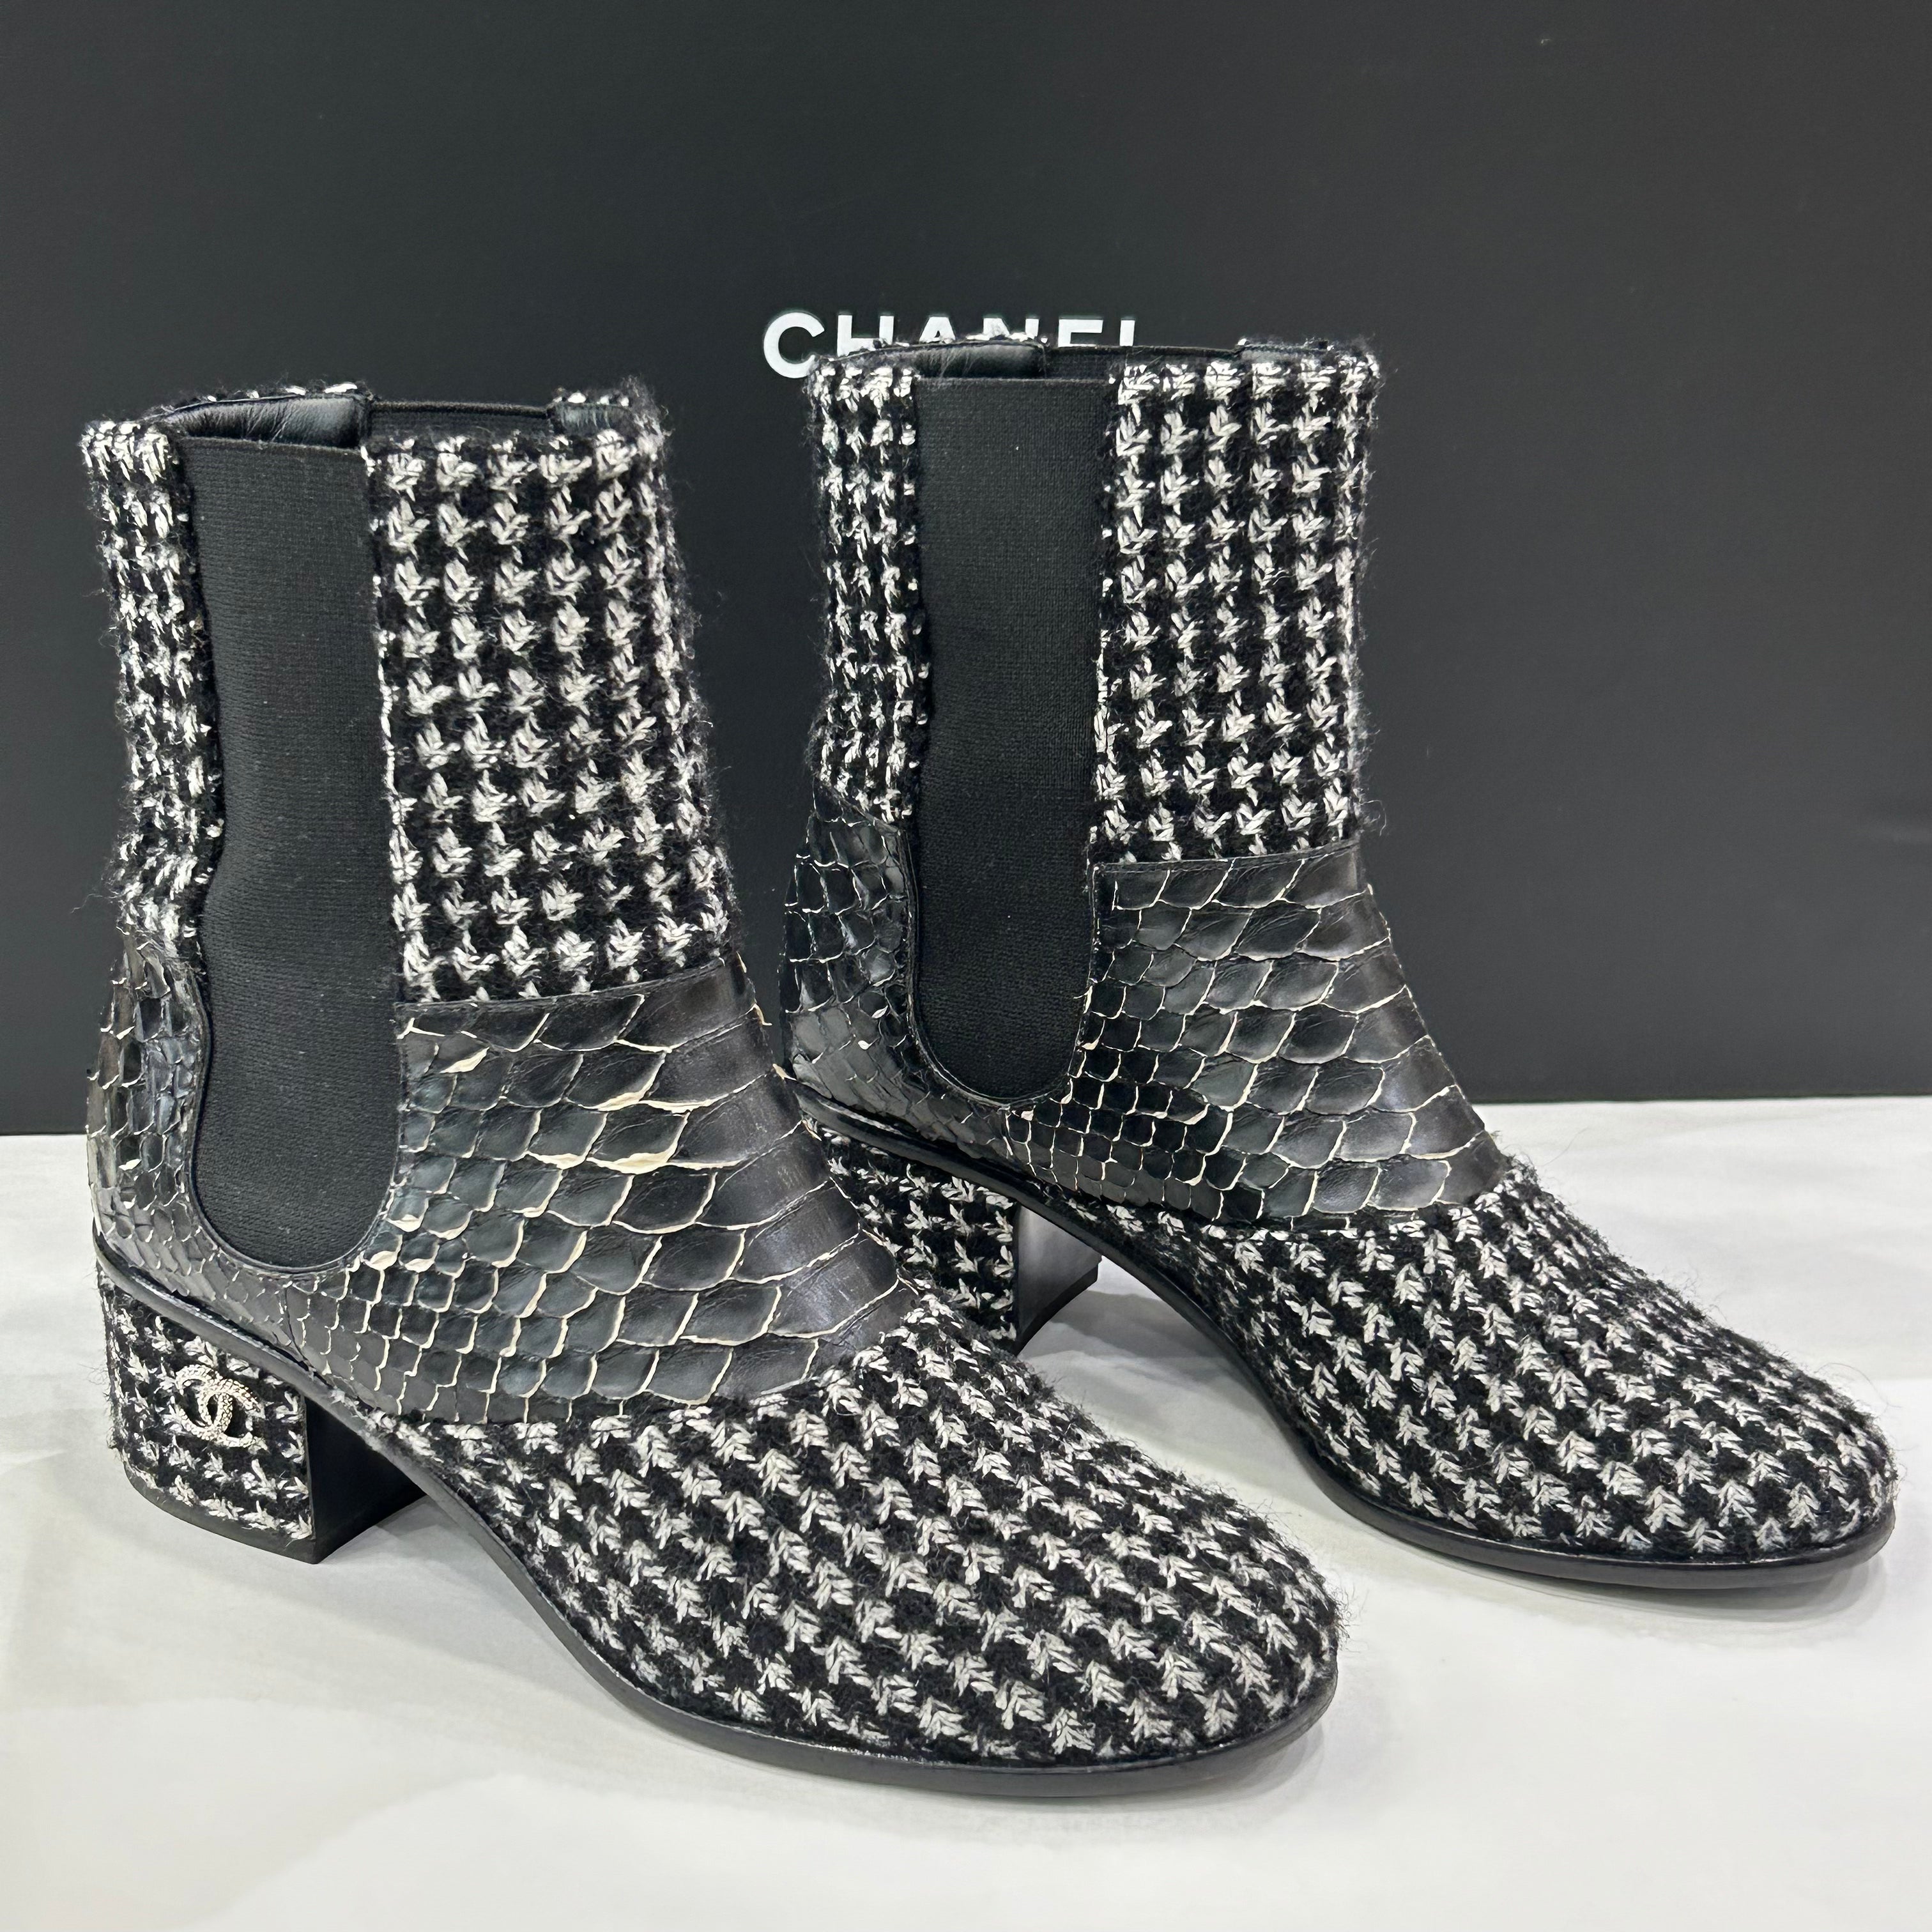 Chanel - Ankle boots size 38